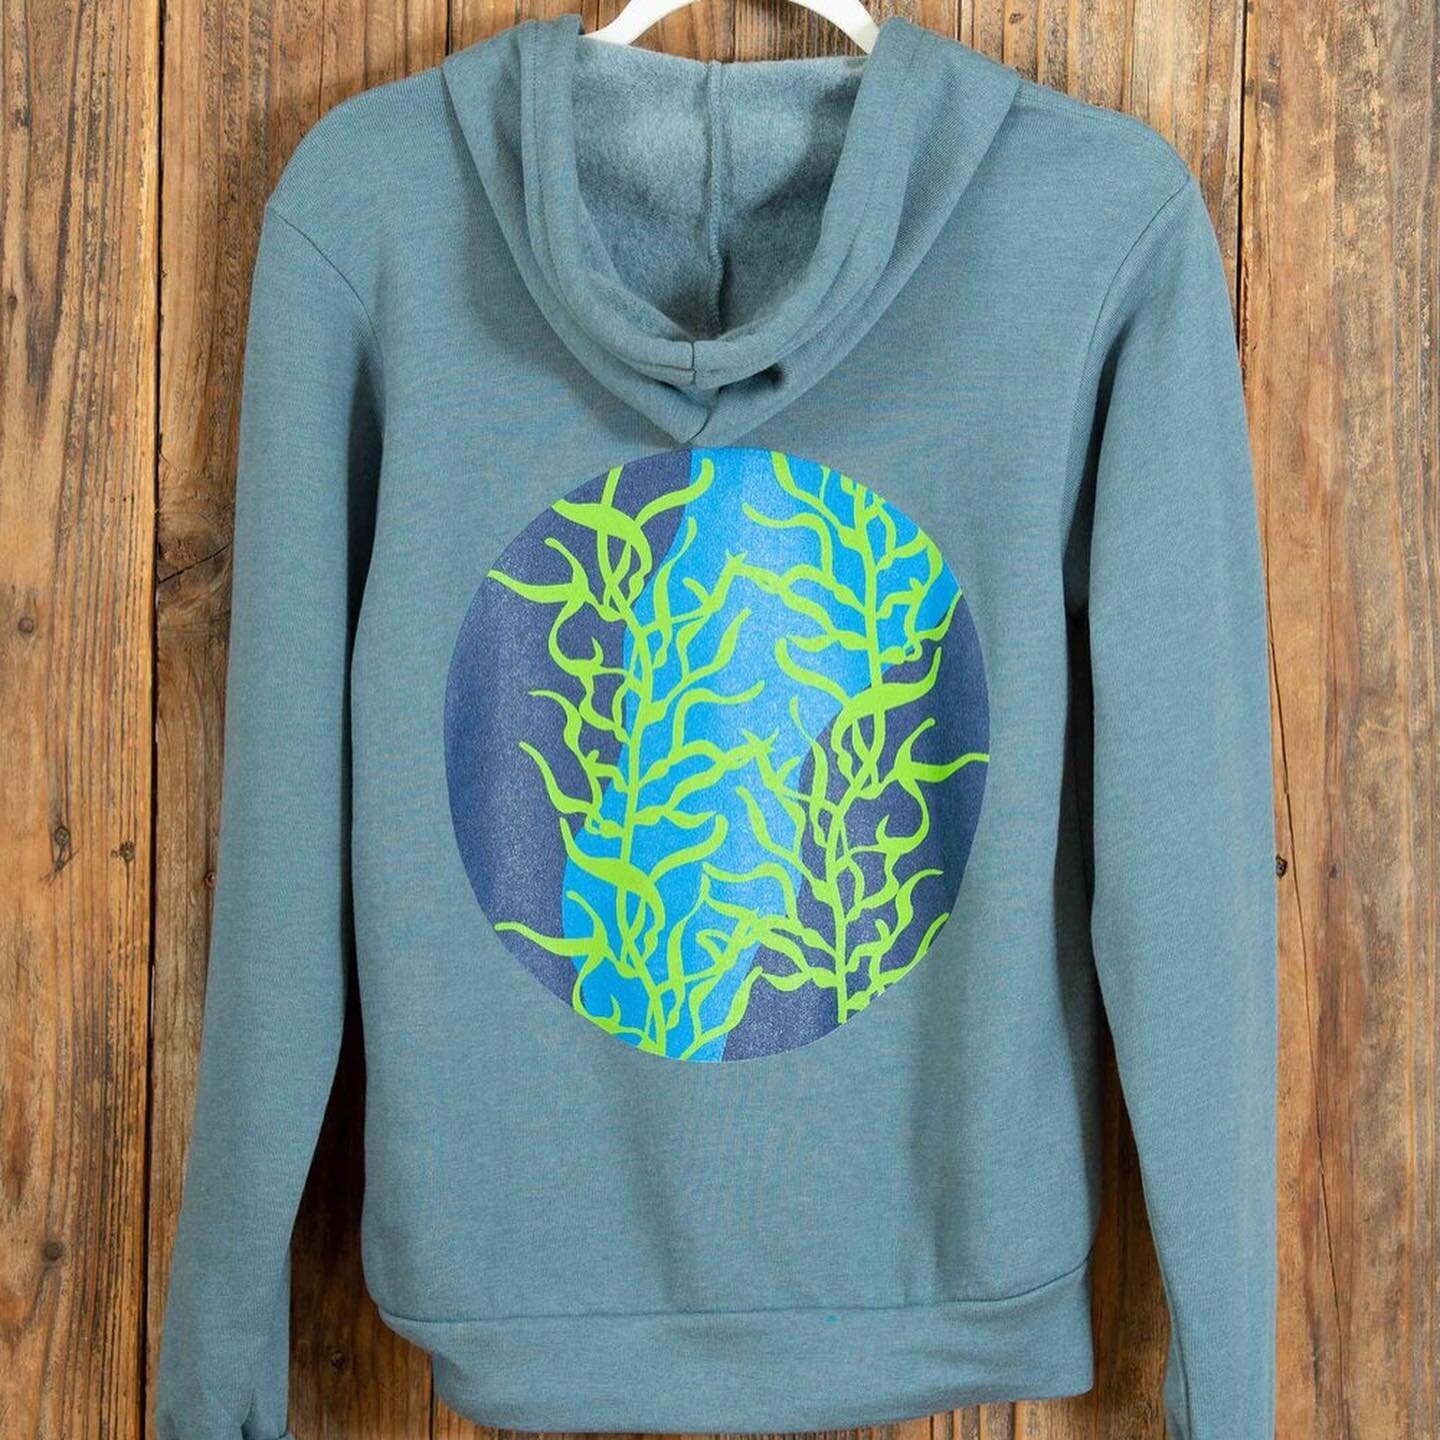 Shop Real Life! Cozy hoodies that make an impact by supporting amazing nonprofits 🌊🦅❤️ 
shop the link in our bio! 

#clothesthatdogood #wearreallife #madebyakid #hoodies #hoodieseason #makeanimpact #santabarbarabusiness